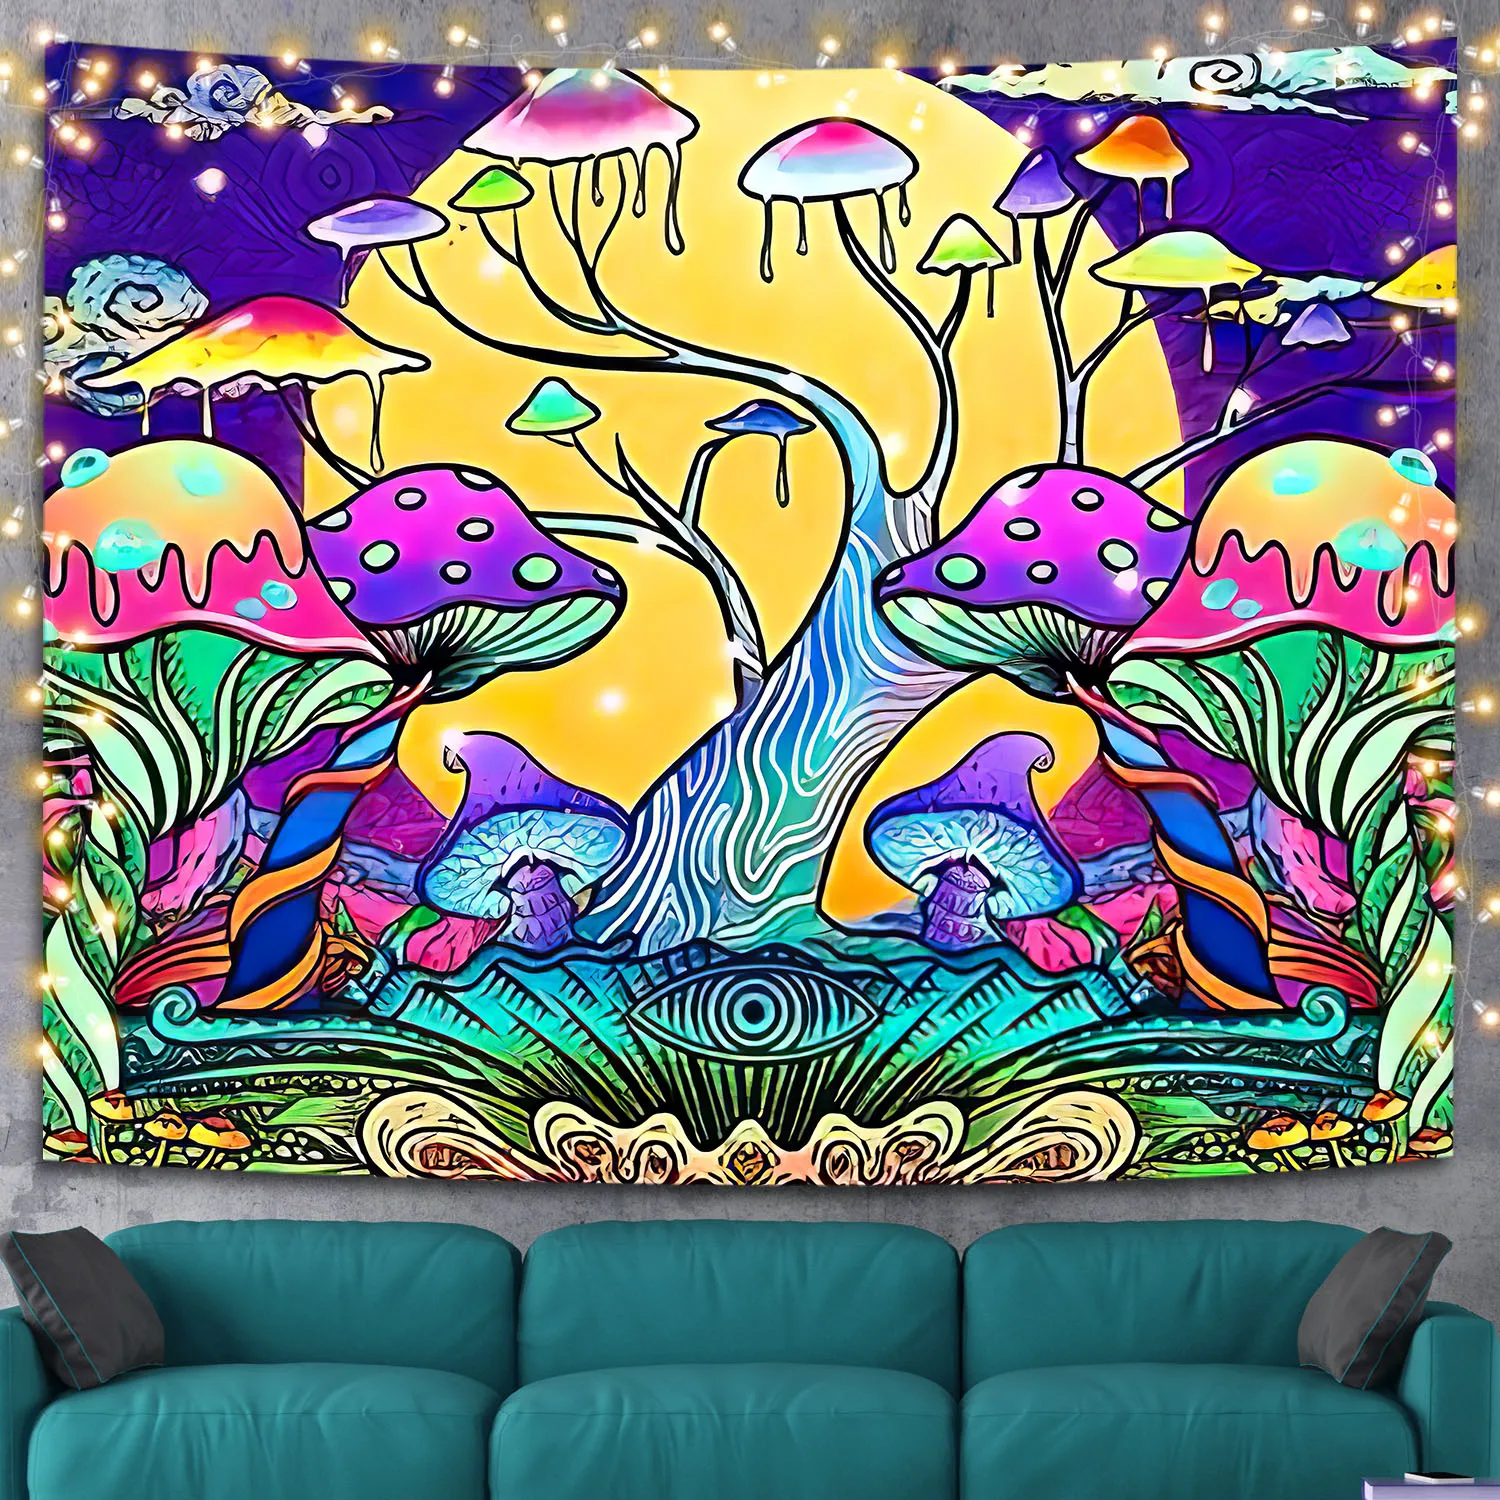 

Trippy Art Tapestry Hippie Mushroom Tapestry Wall Hanging Tapestries for Home Bedroom Living Room Apartment Dorm Office Decor